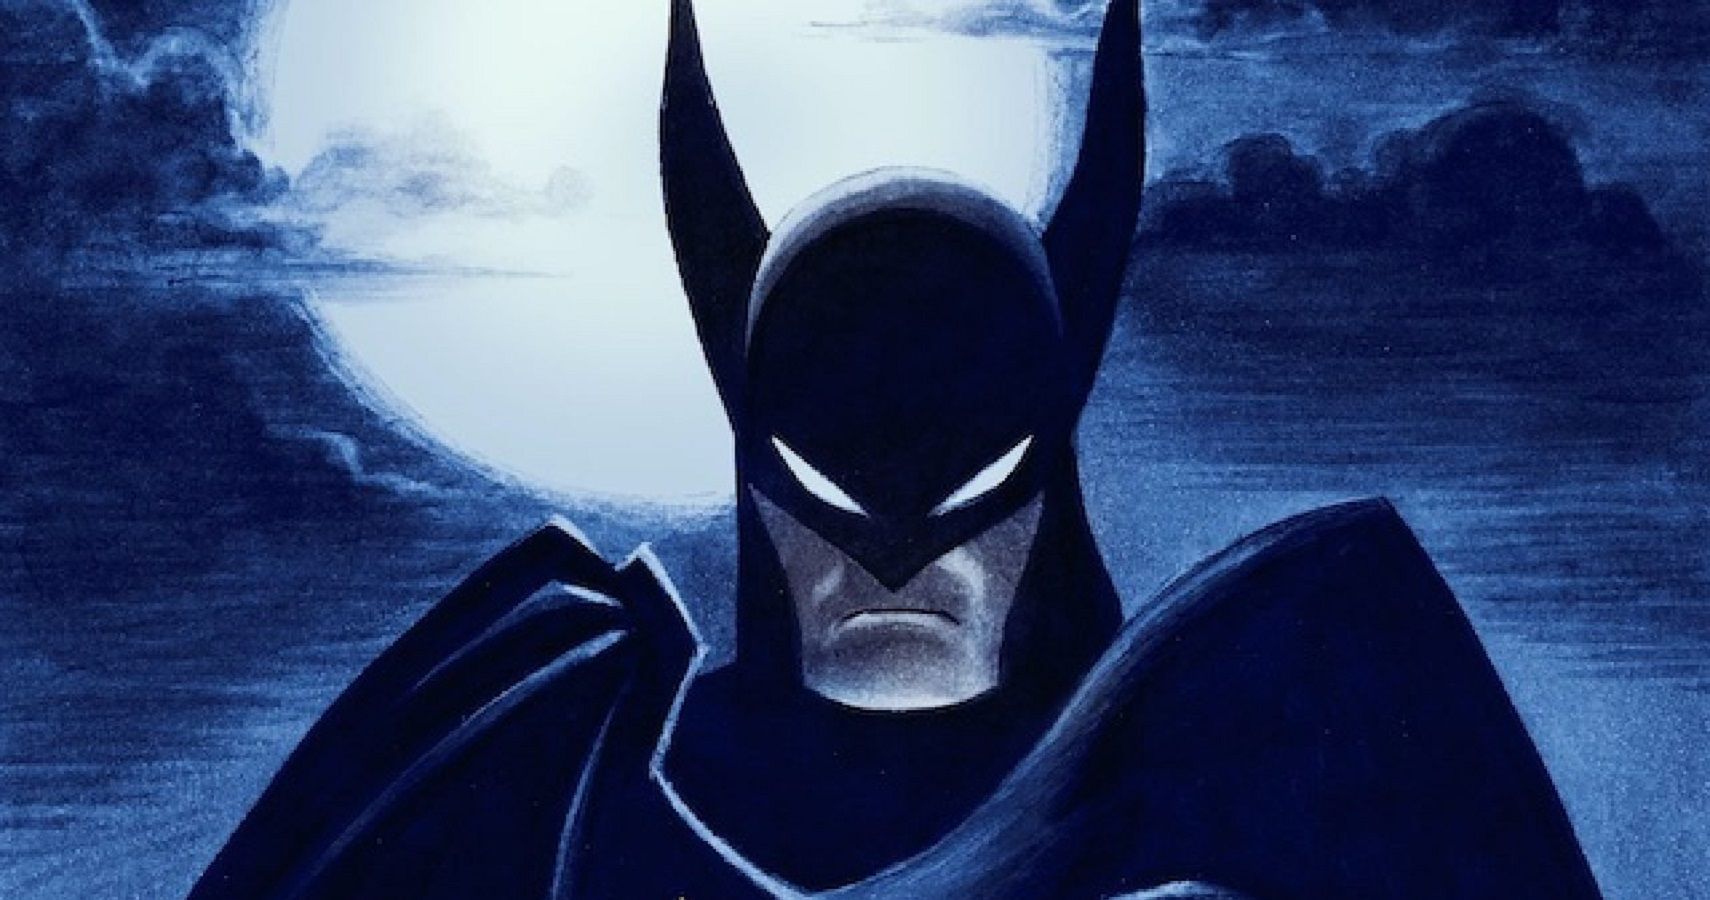 Batman Caped Crusader Could Be The Best Superhero Cartoon In A Generation